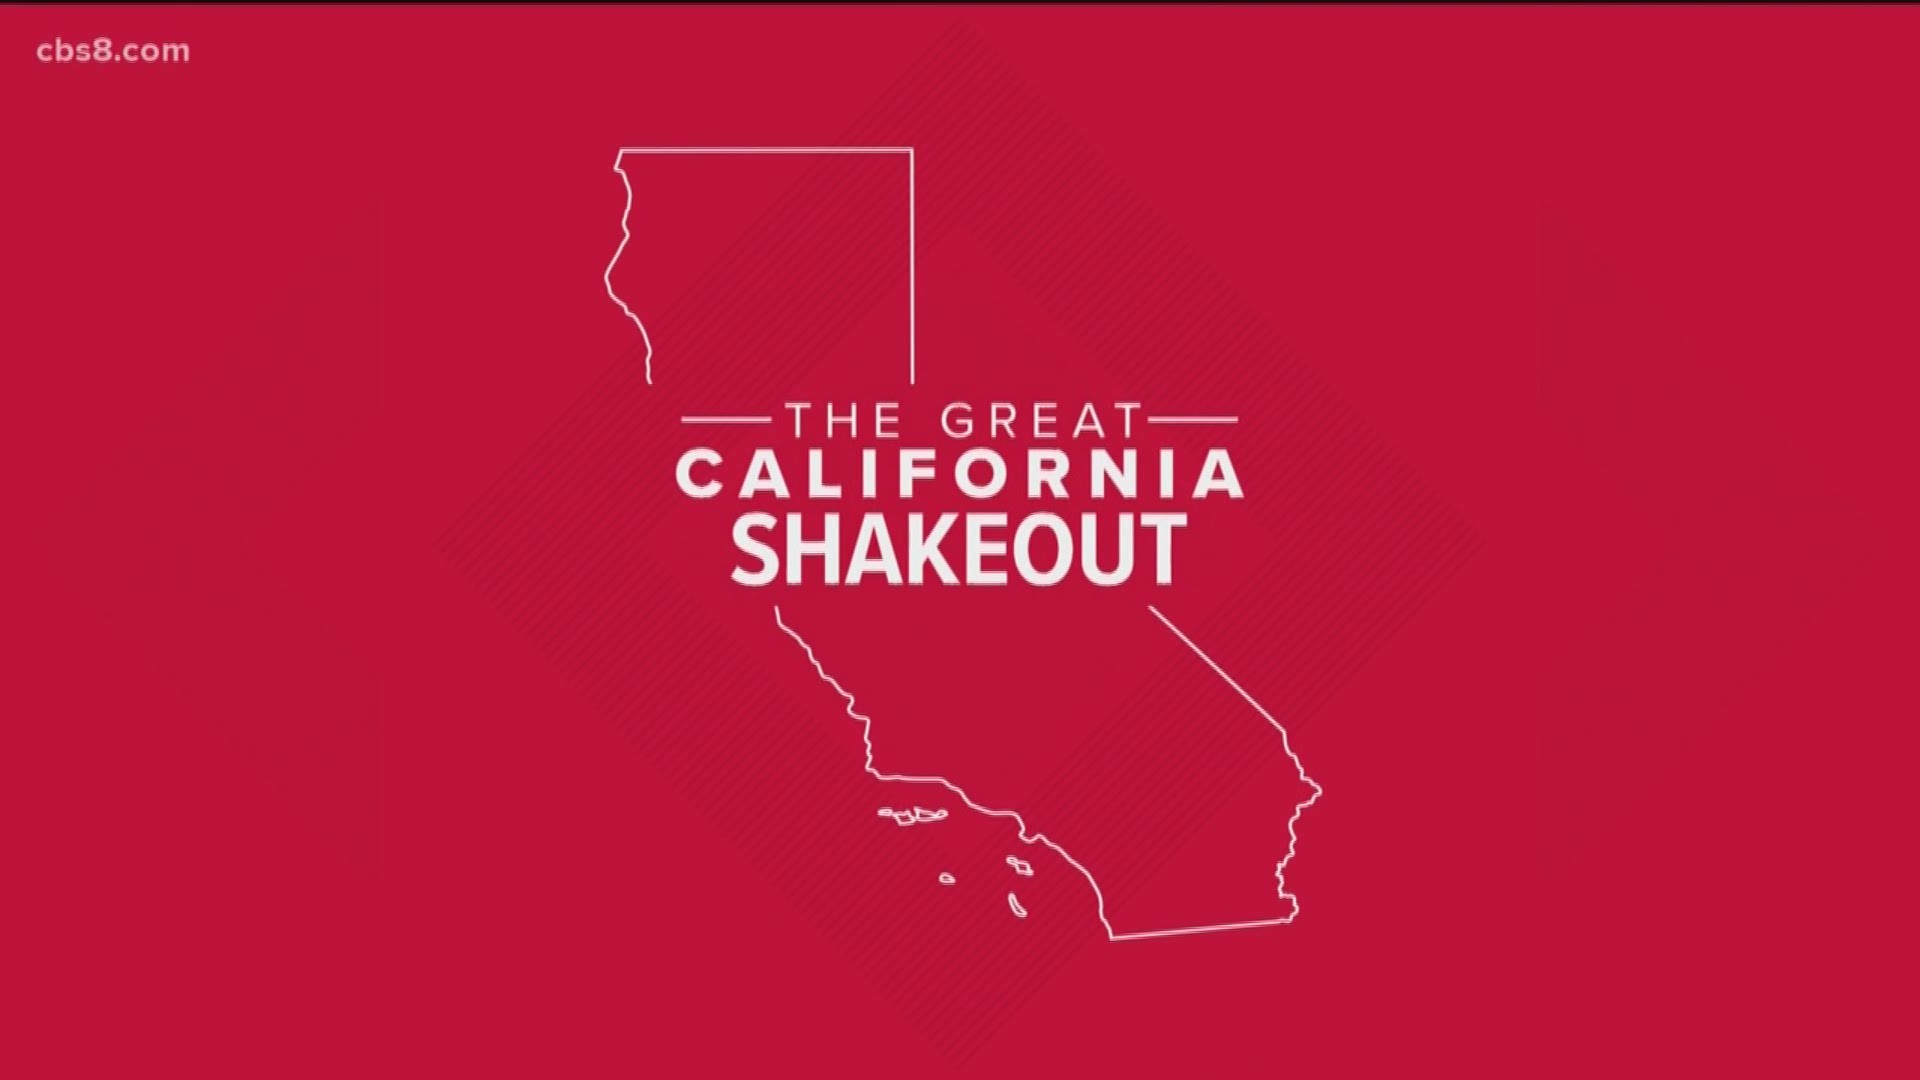 The nation's first statewide quake warning system was launched Thursday, coinciding with the annual Great Shakeout safety drill.